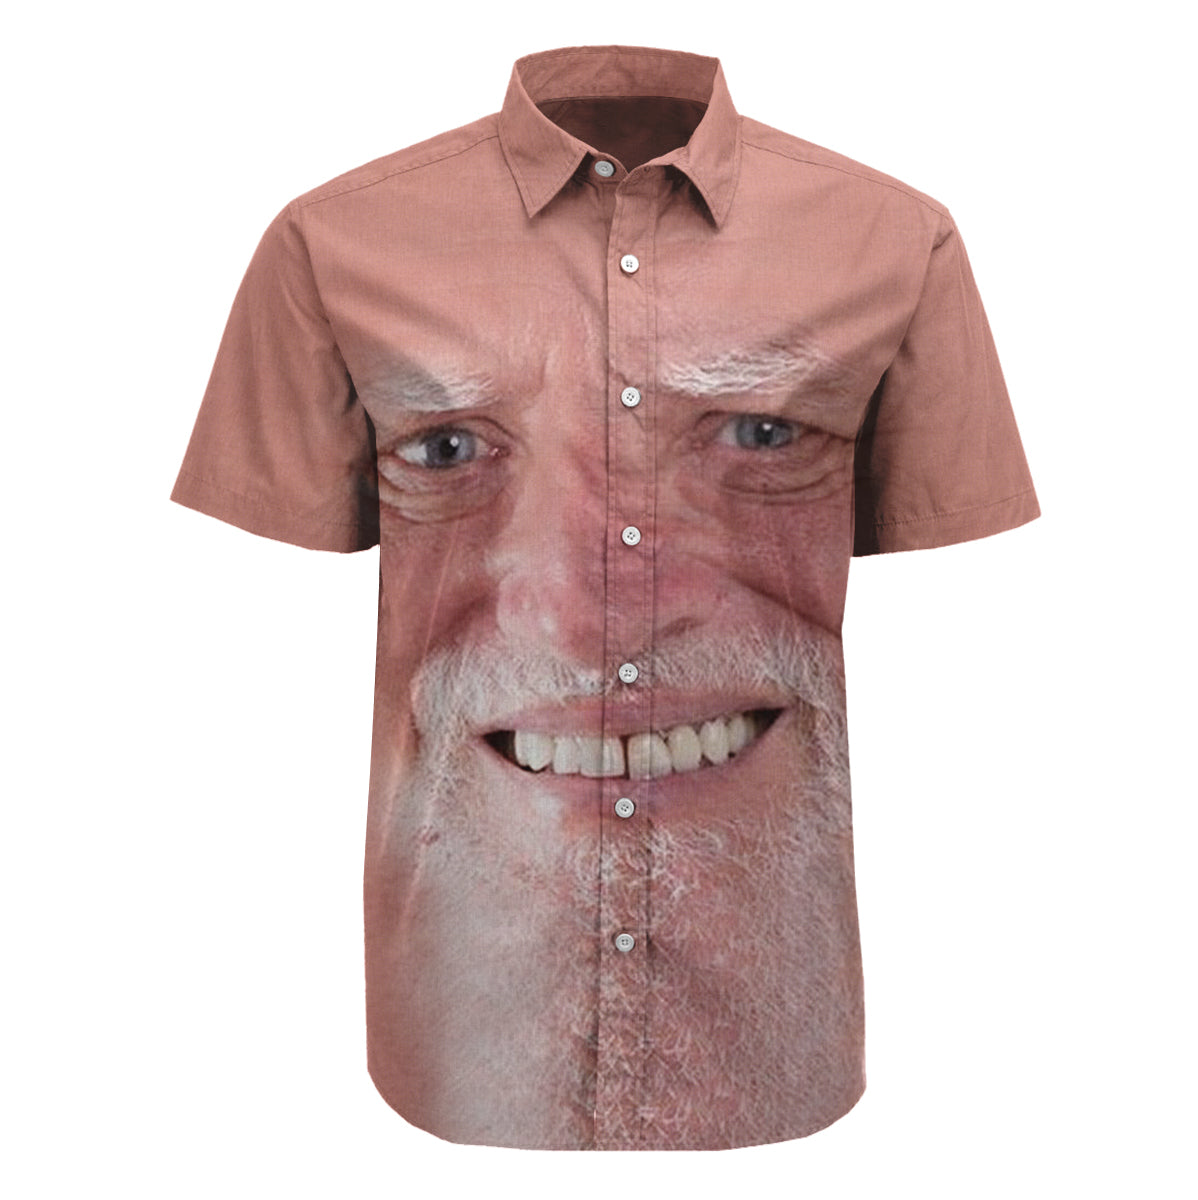 Harold Hide The Pain Button Up